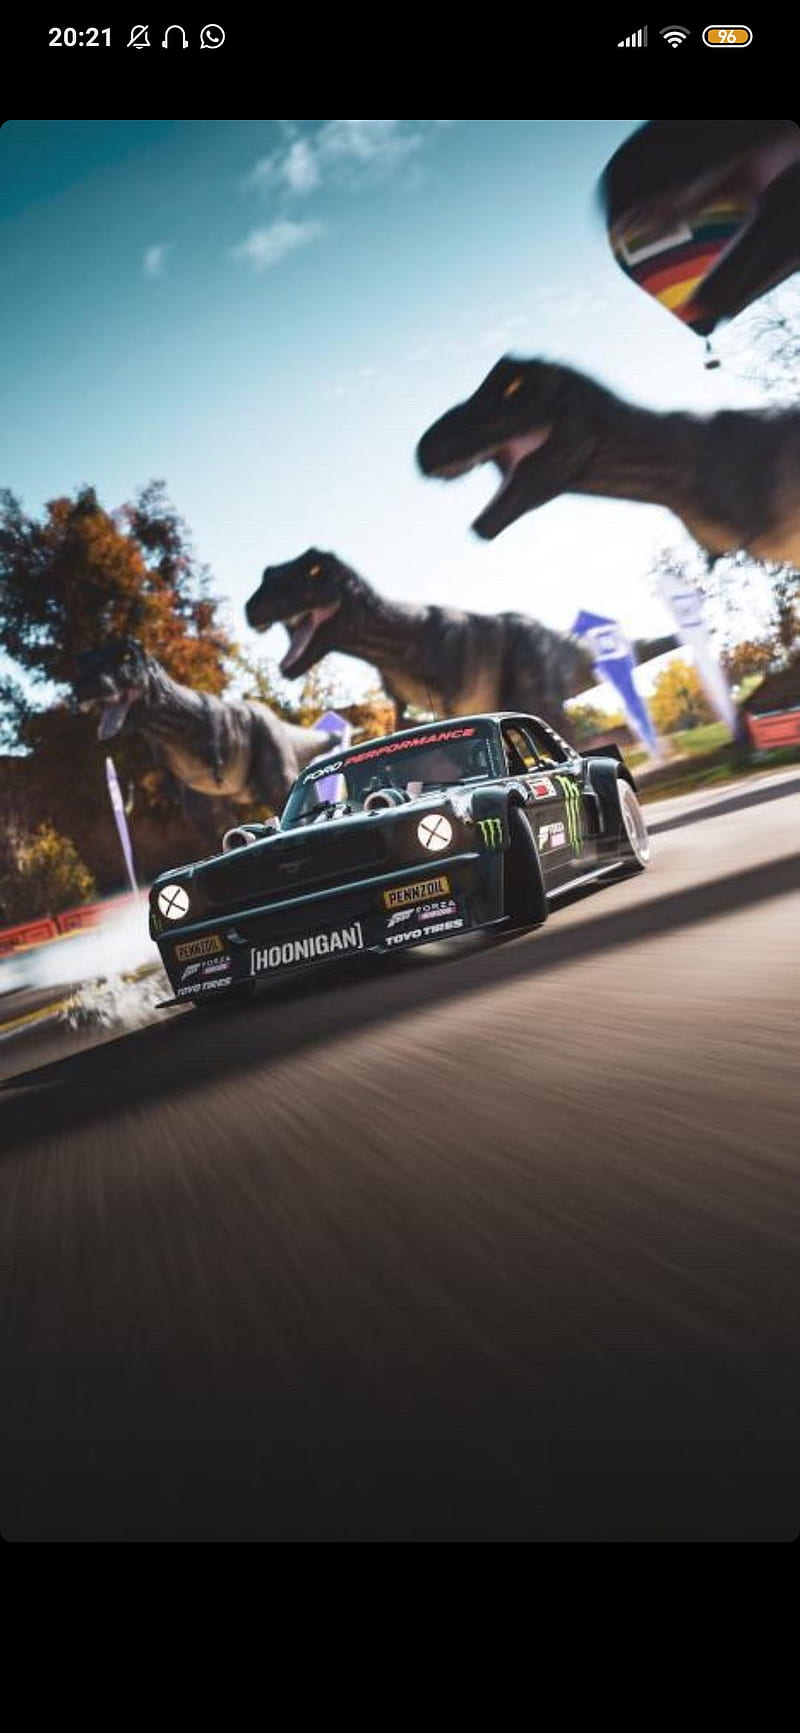 Ken Block - New EPIC video project, new livery for my Ford Mustang RTR  Hoonicorn V2. See it in the #GymkhanaTEN trailer here:  https://www.youtube.com/watch?v=xpB25Cn-vXA | Facebook